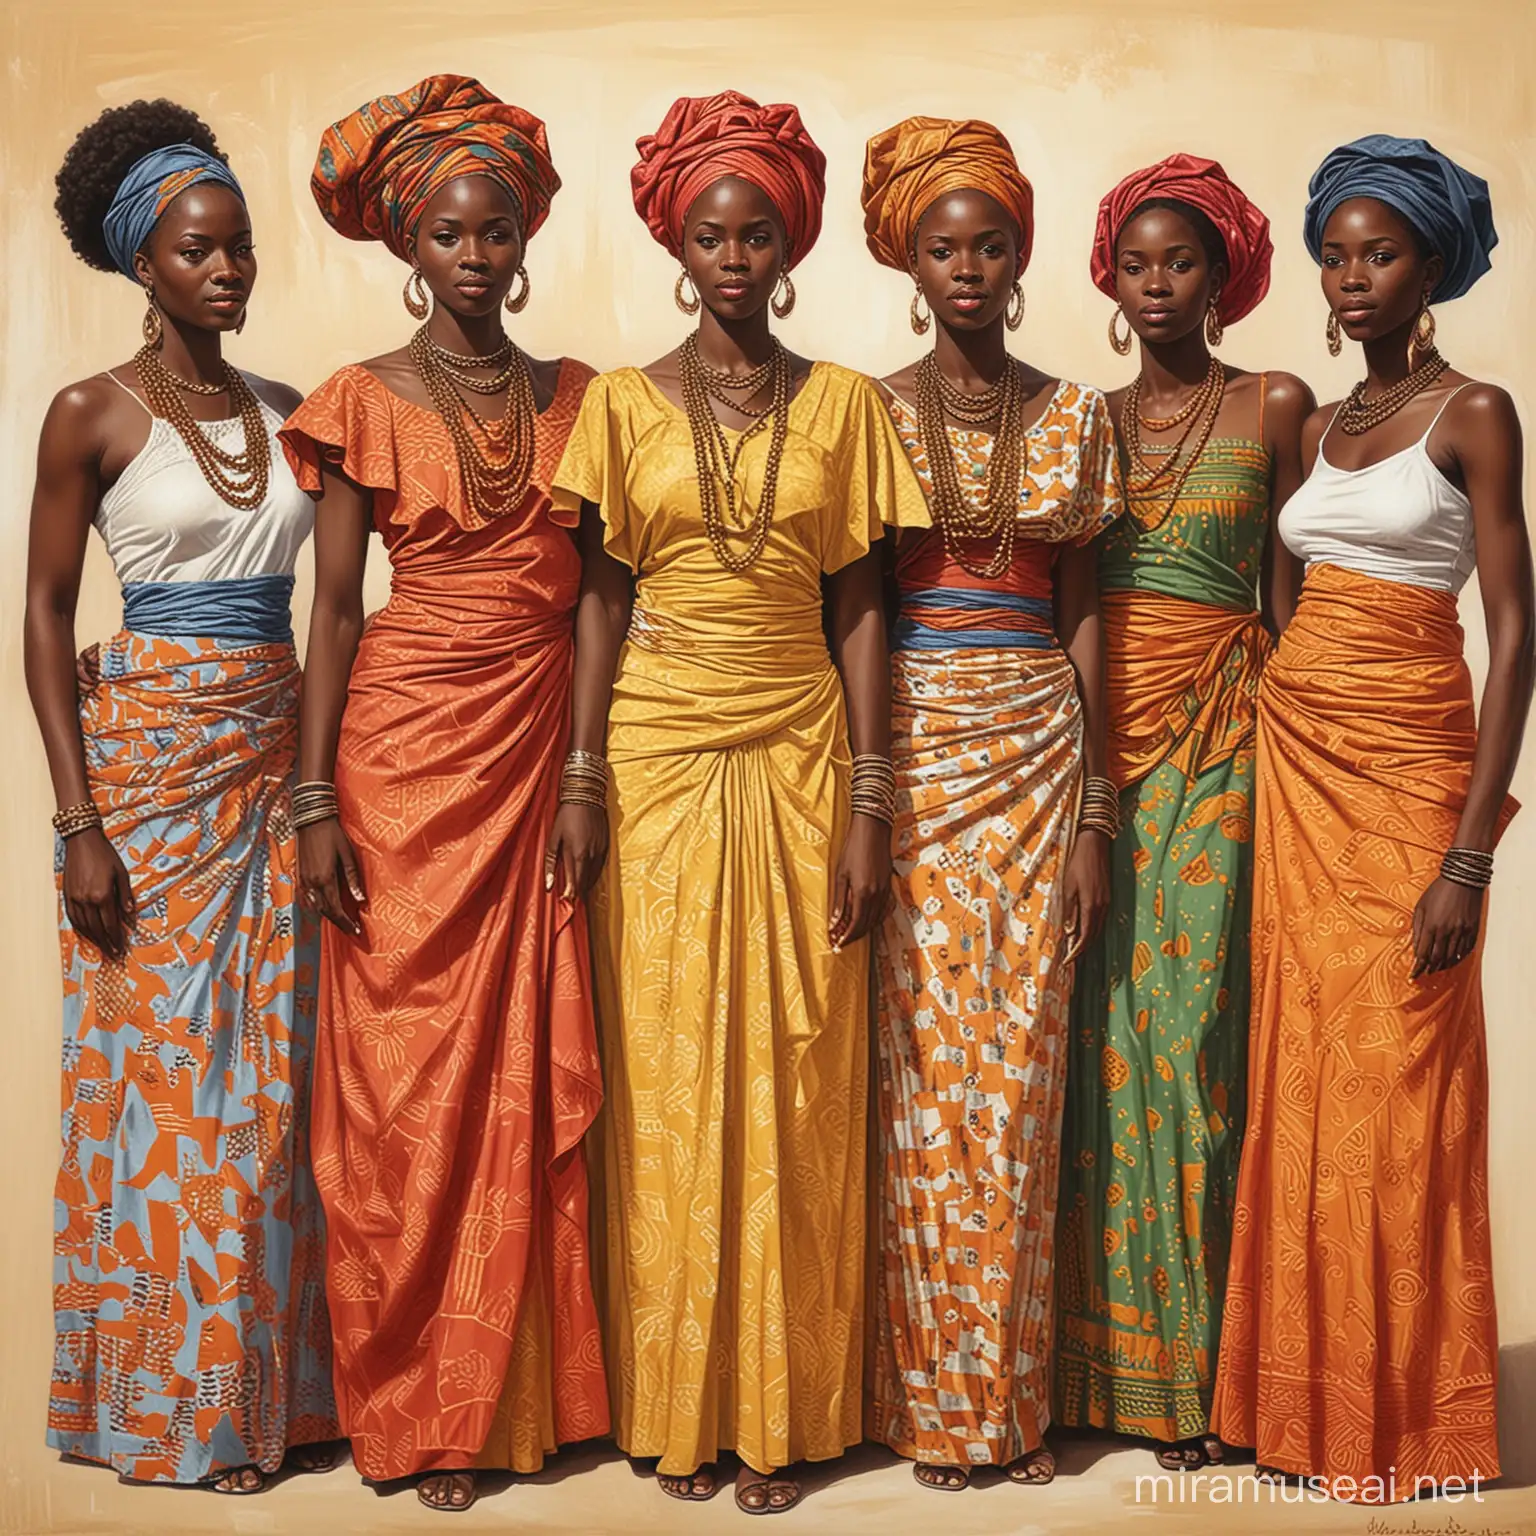 group of African women standing together in the art style of Madge Scott